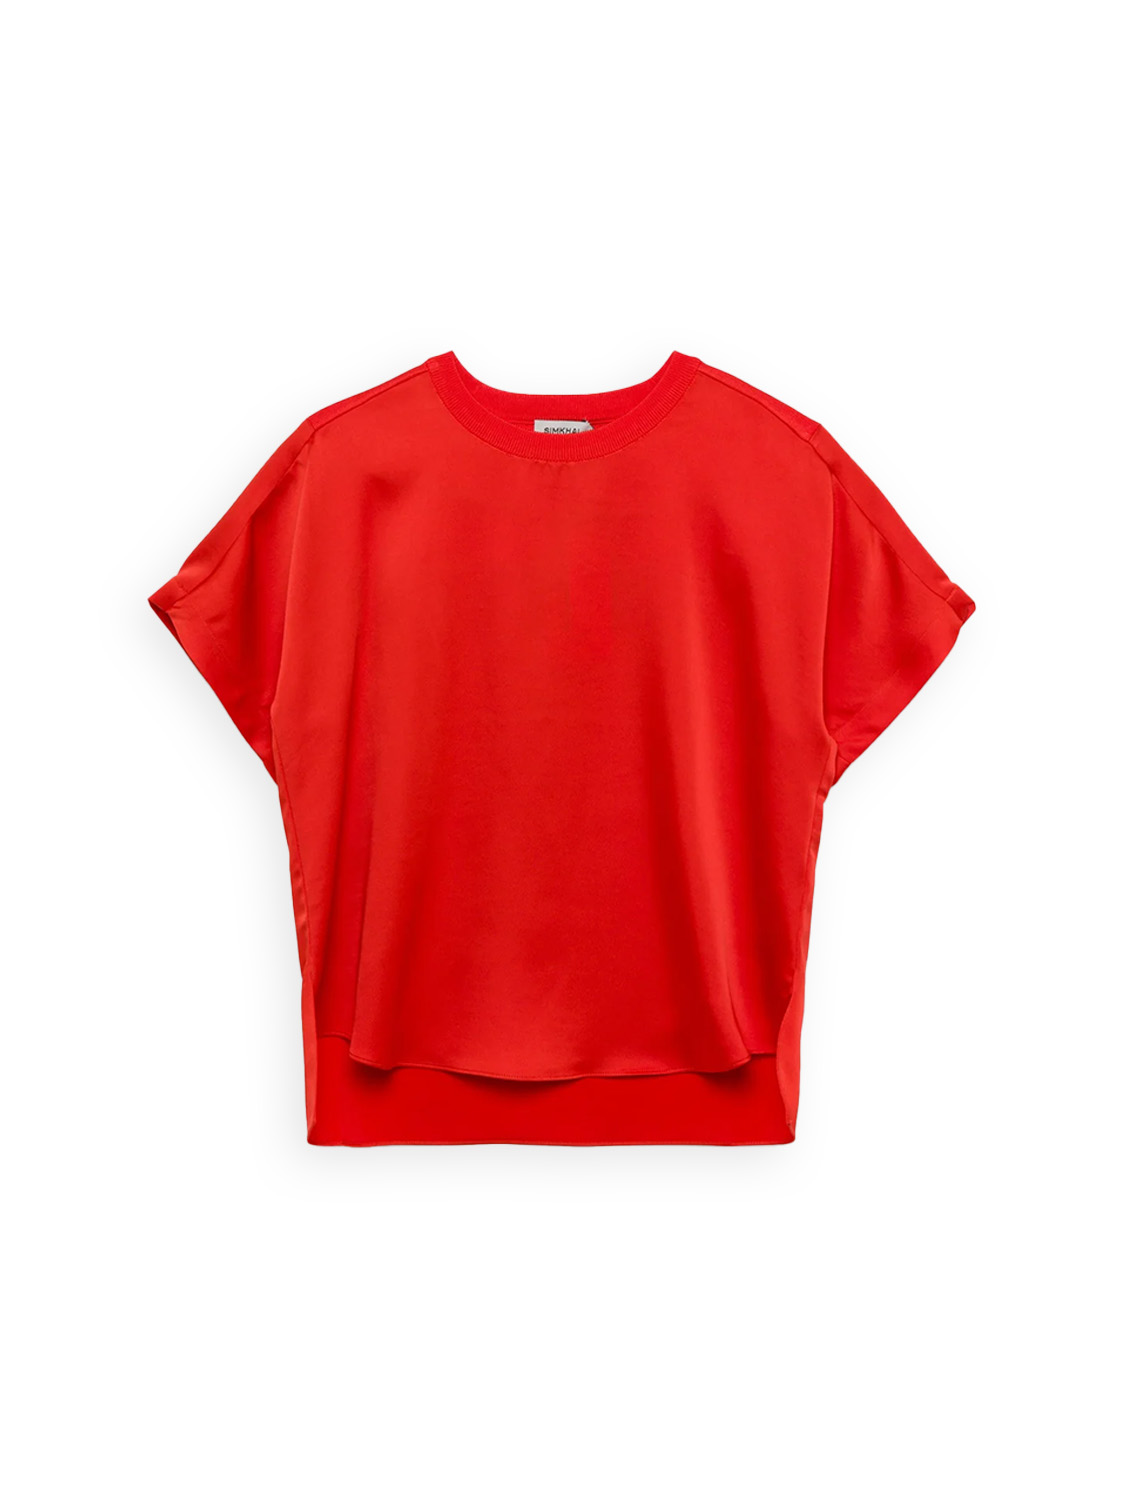 Simkhai Addy – T-Shirt with a knit back  red L